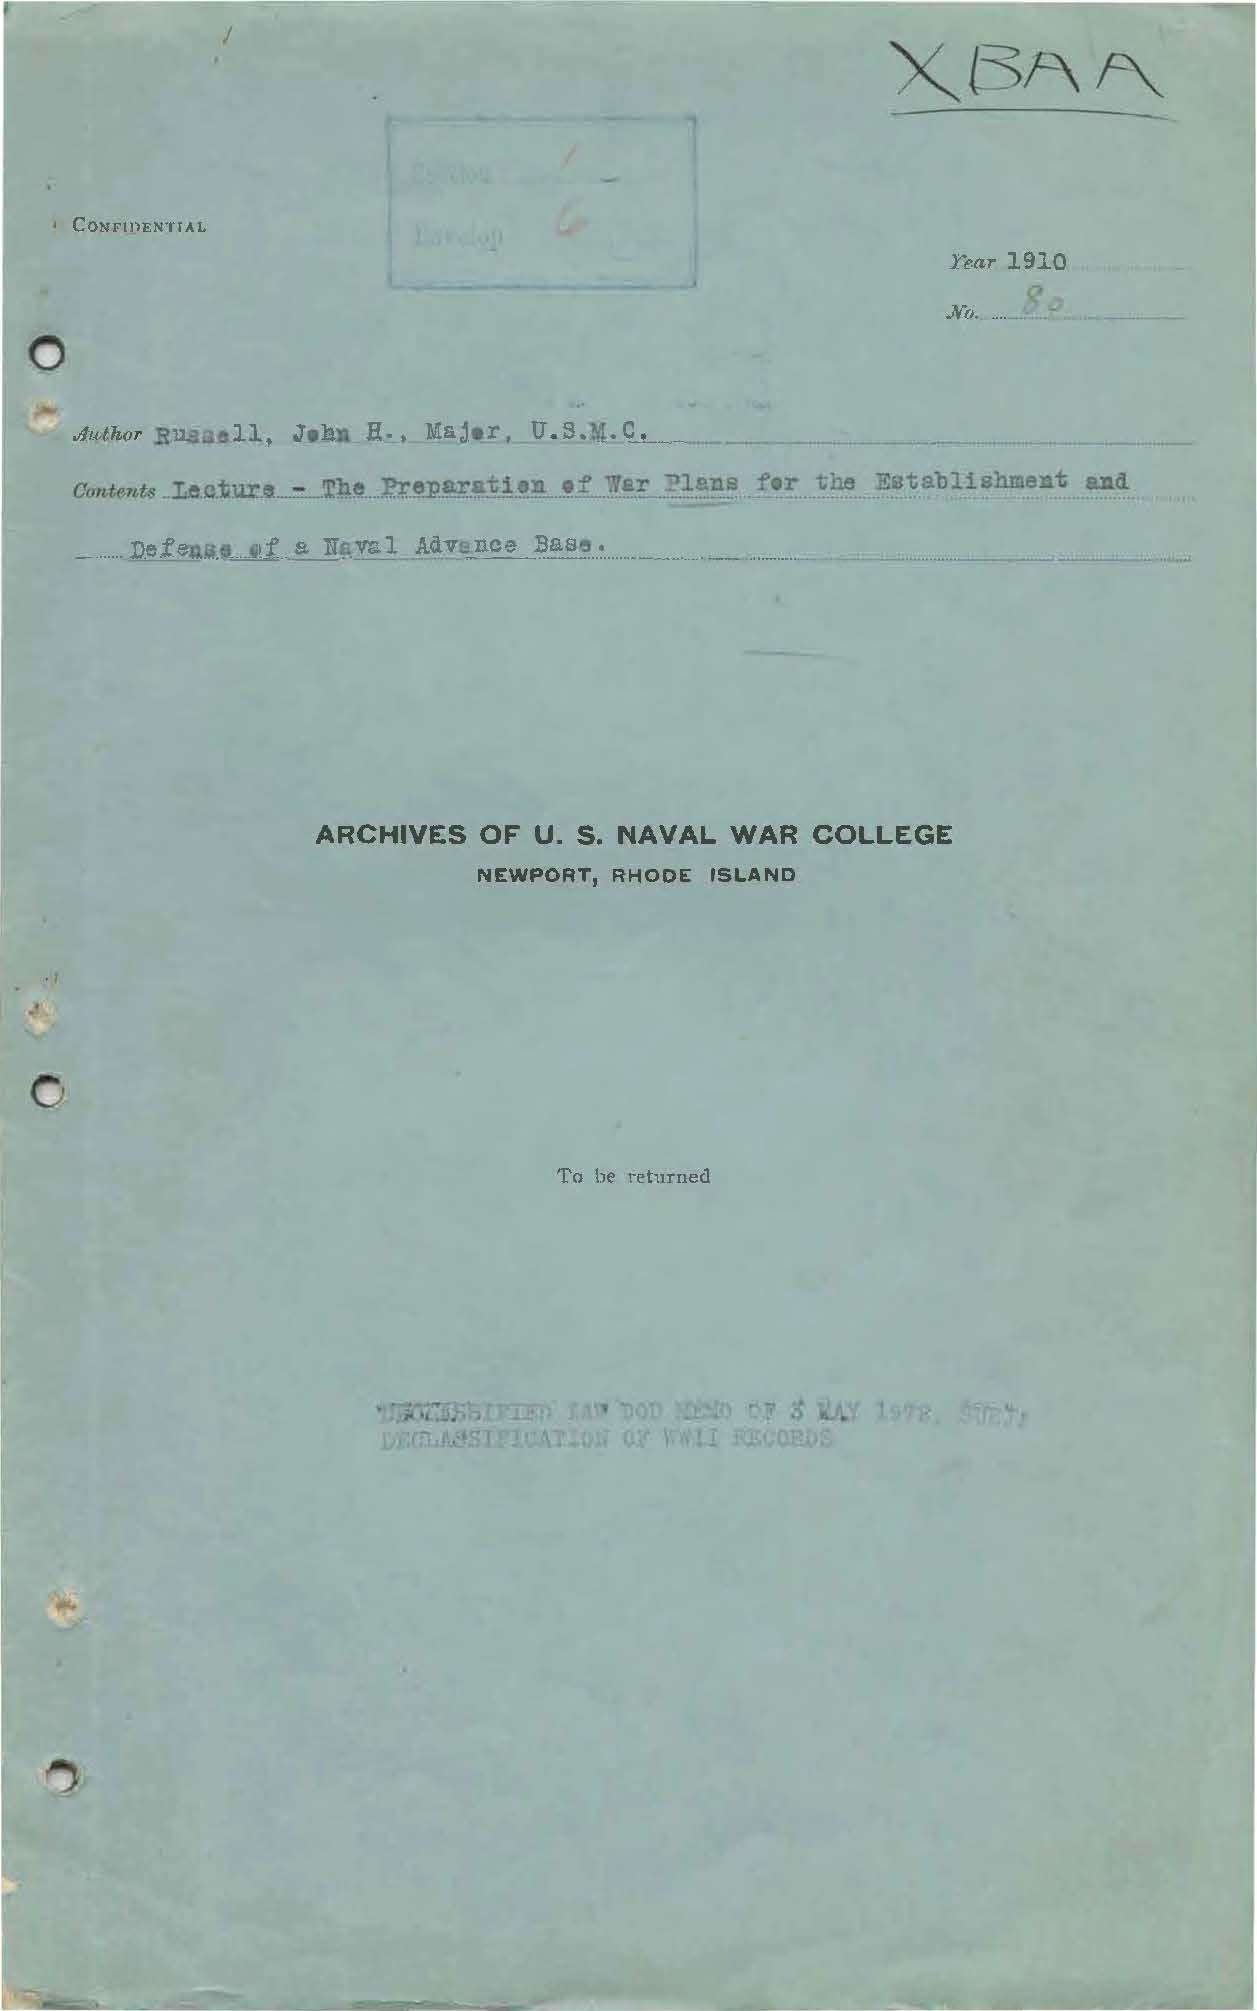 Preparation of War Plans for the Establishment and Defense of a Naval Advance Base, John H. Russell